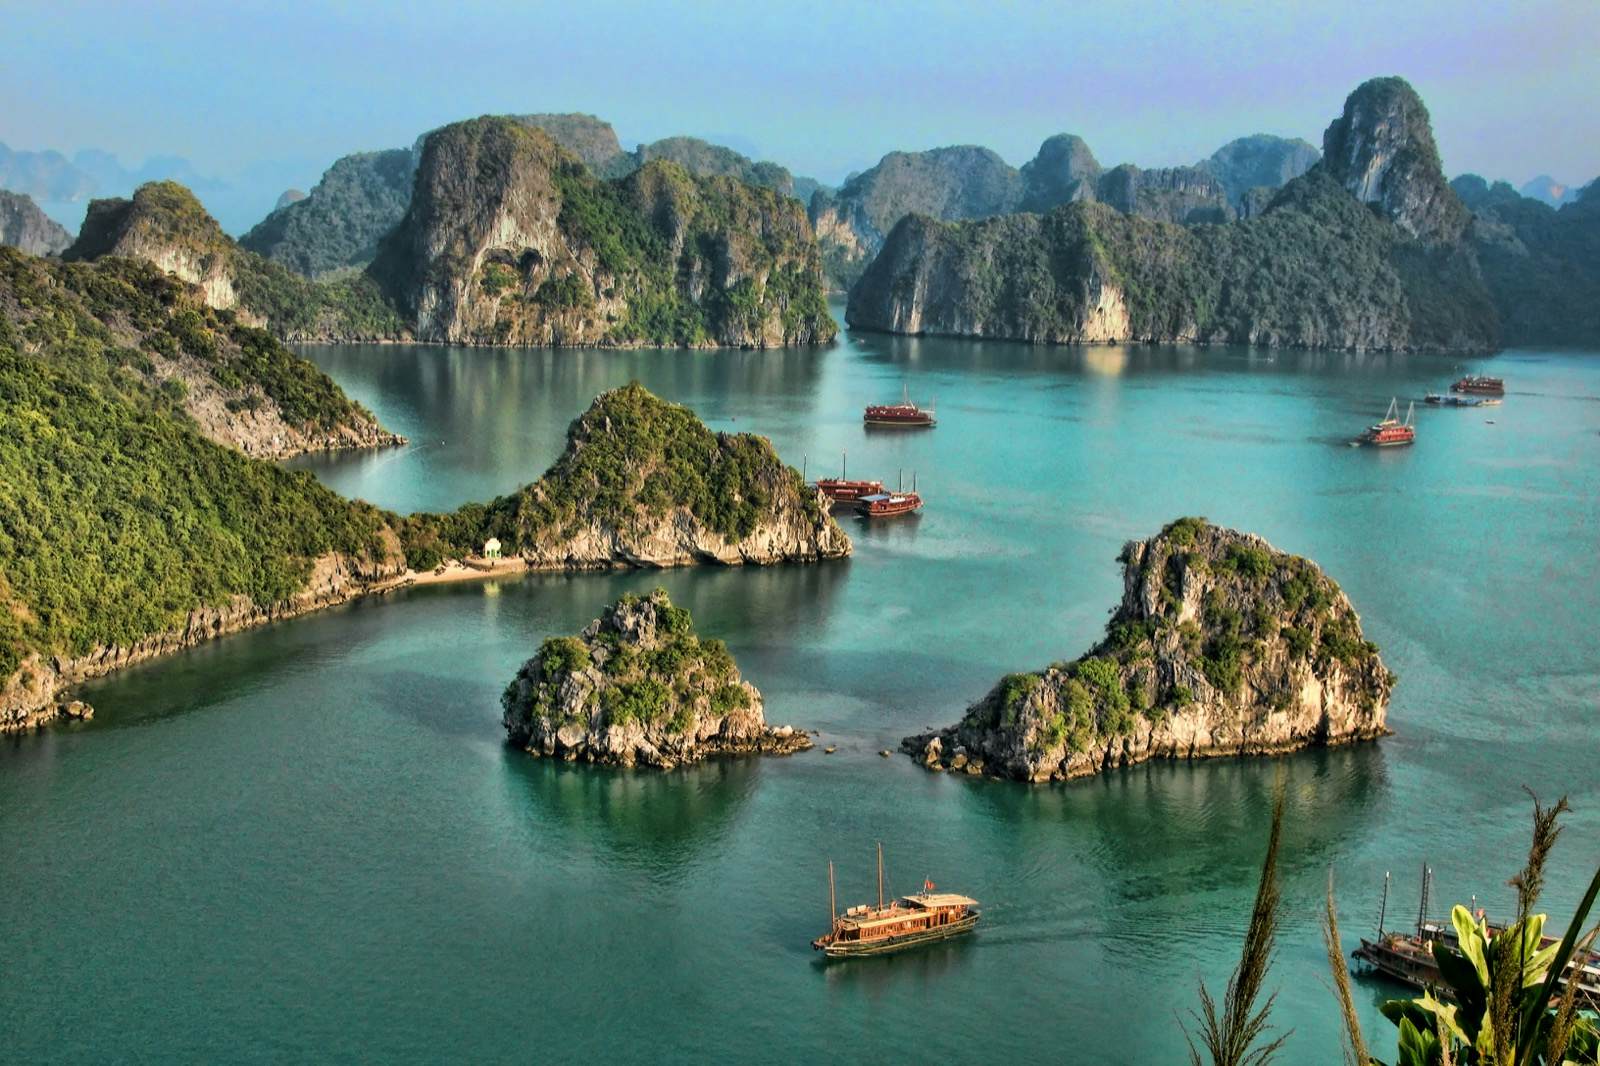 boats in the water with islands with Ha Long Bay in the background